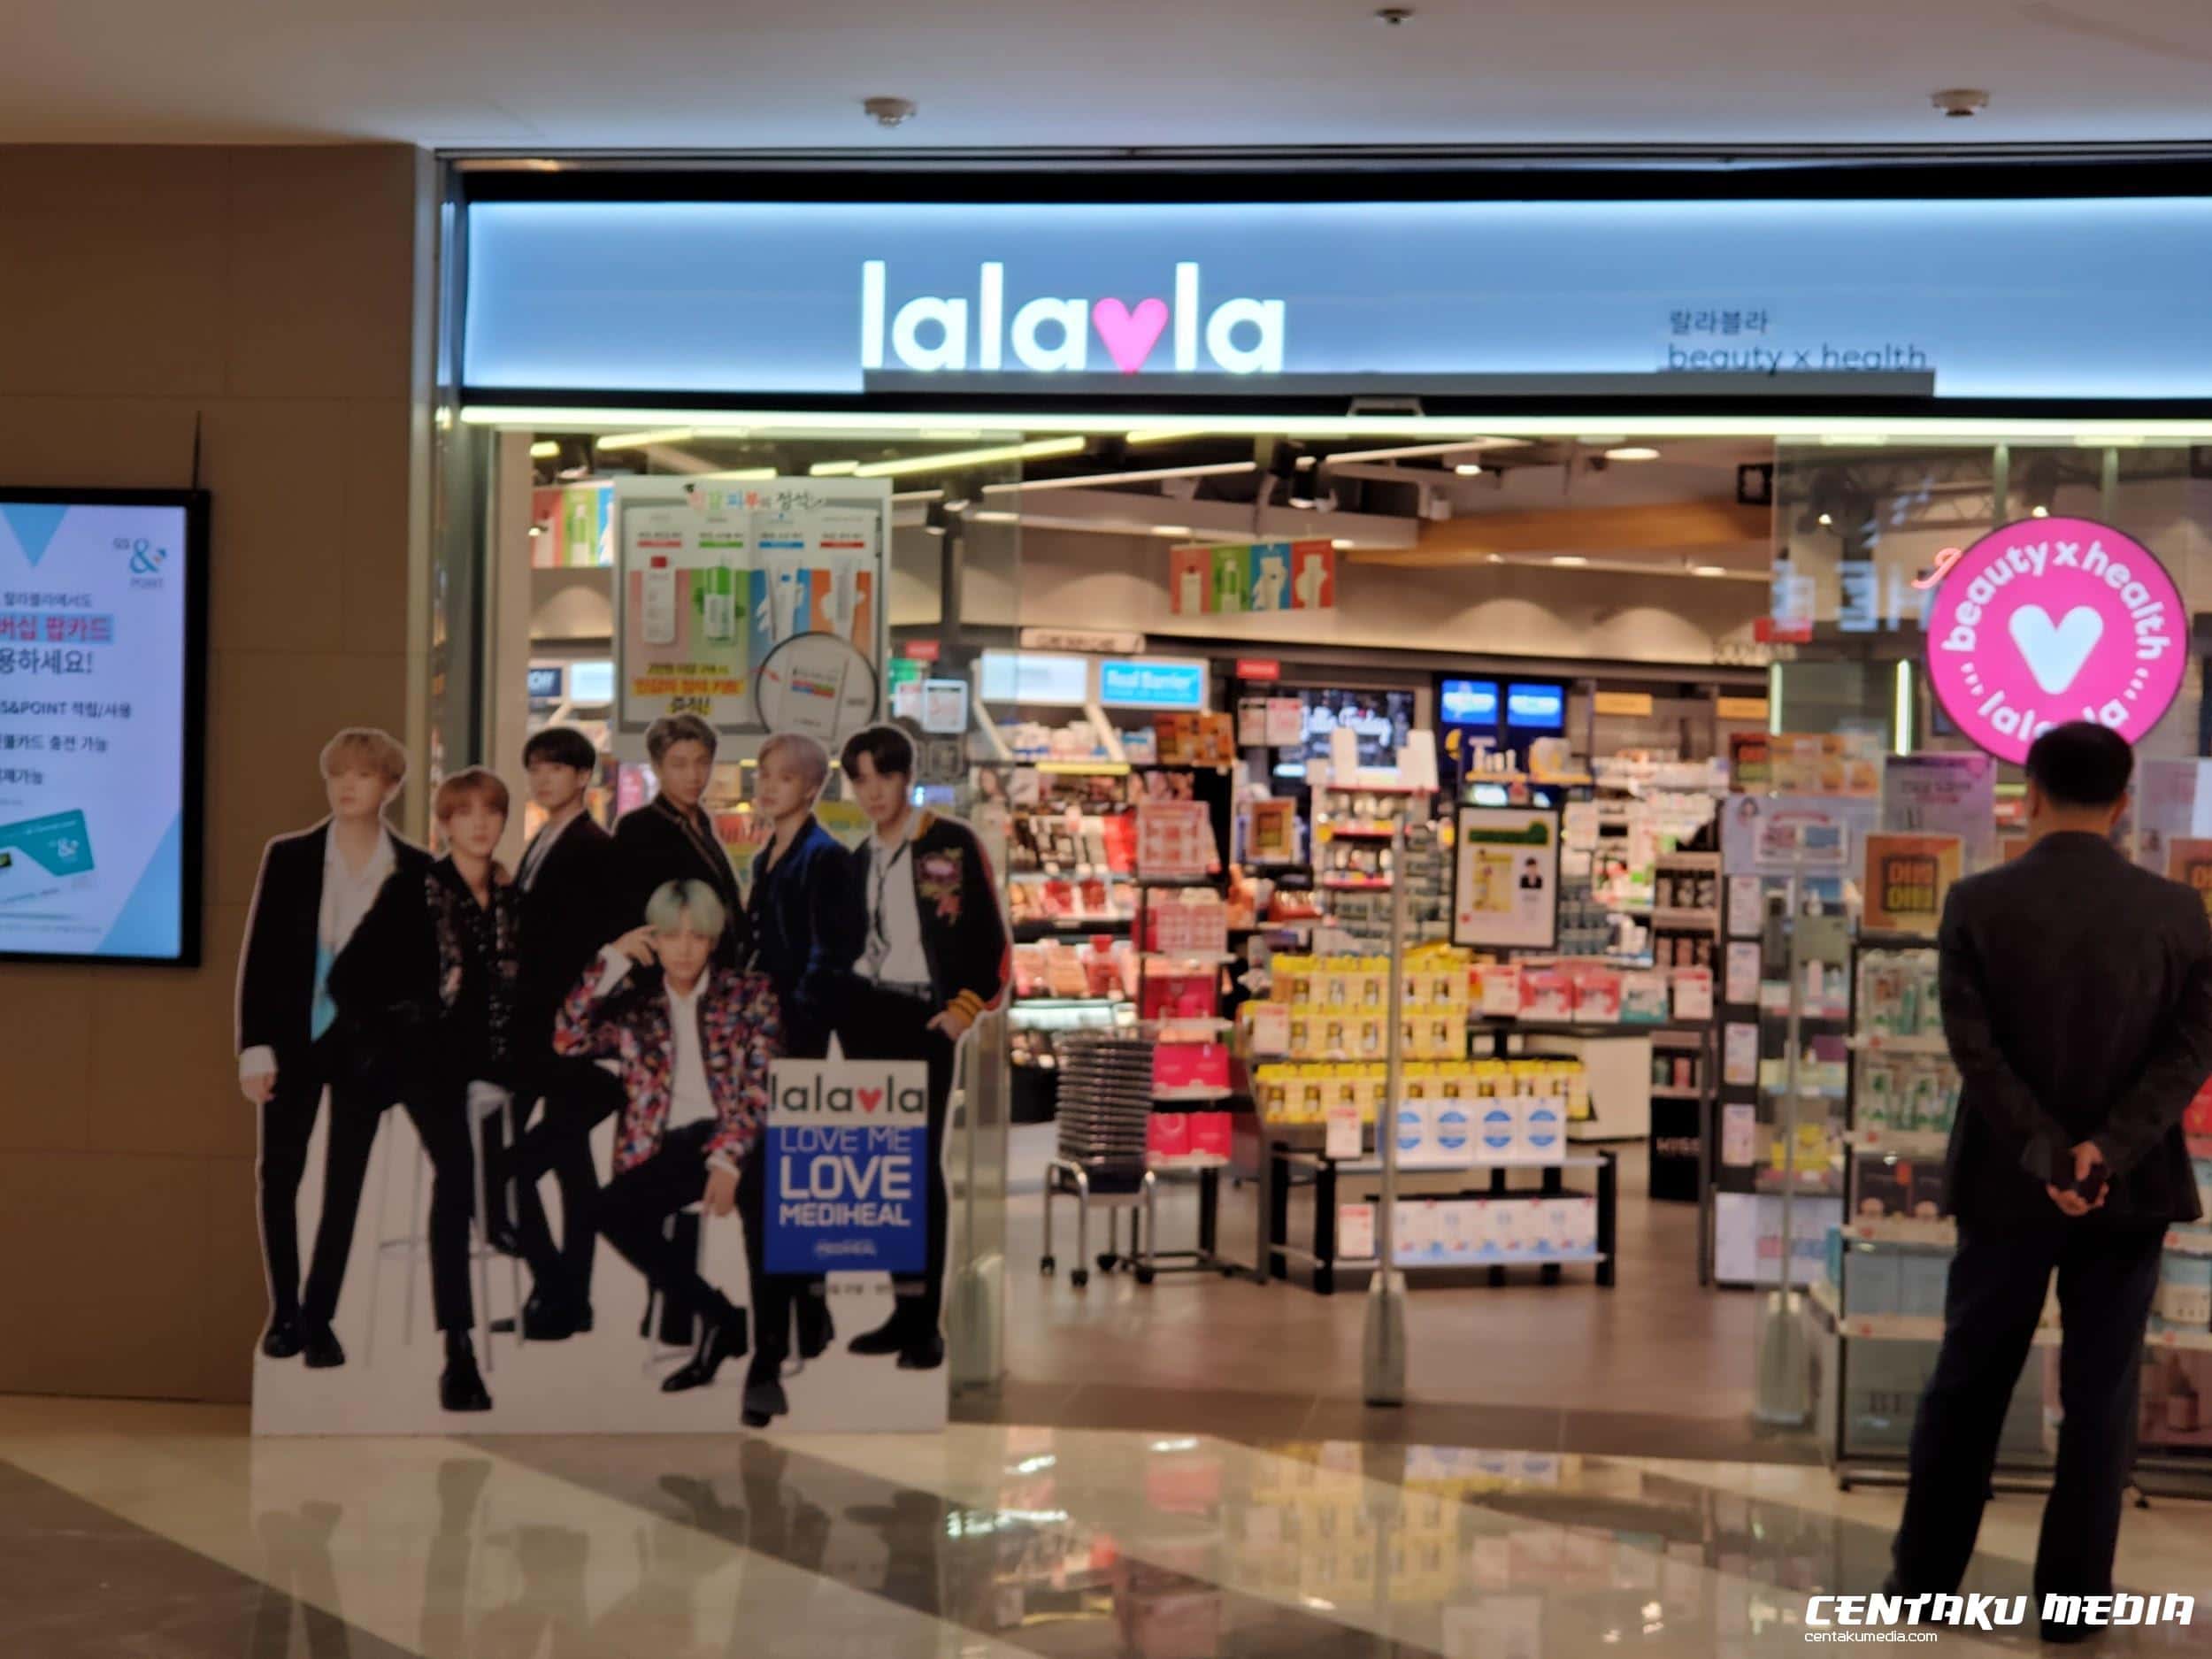 A pop-up poster featuring BTS stands in front of a Heath & Beauty store, Lalavla.